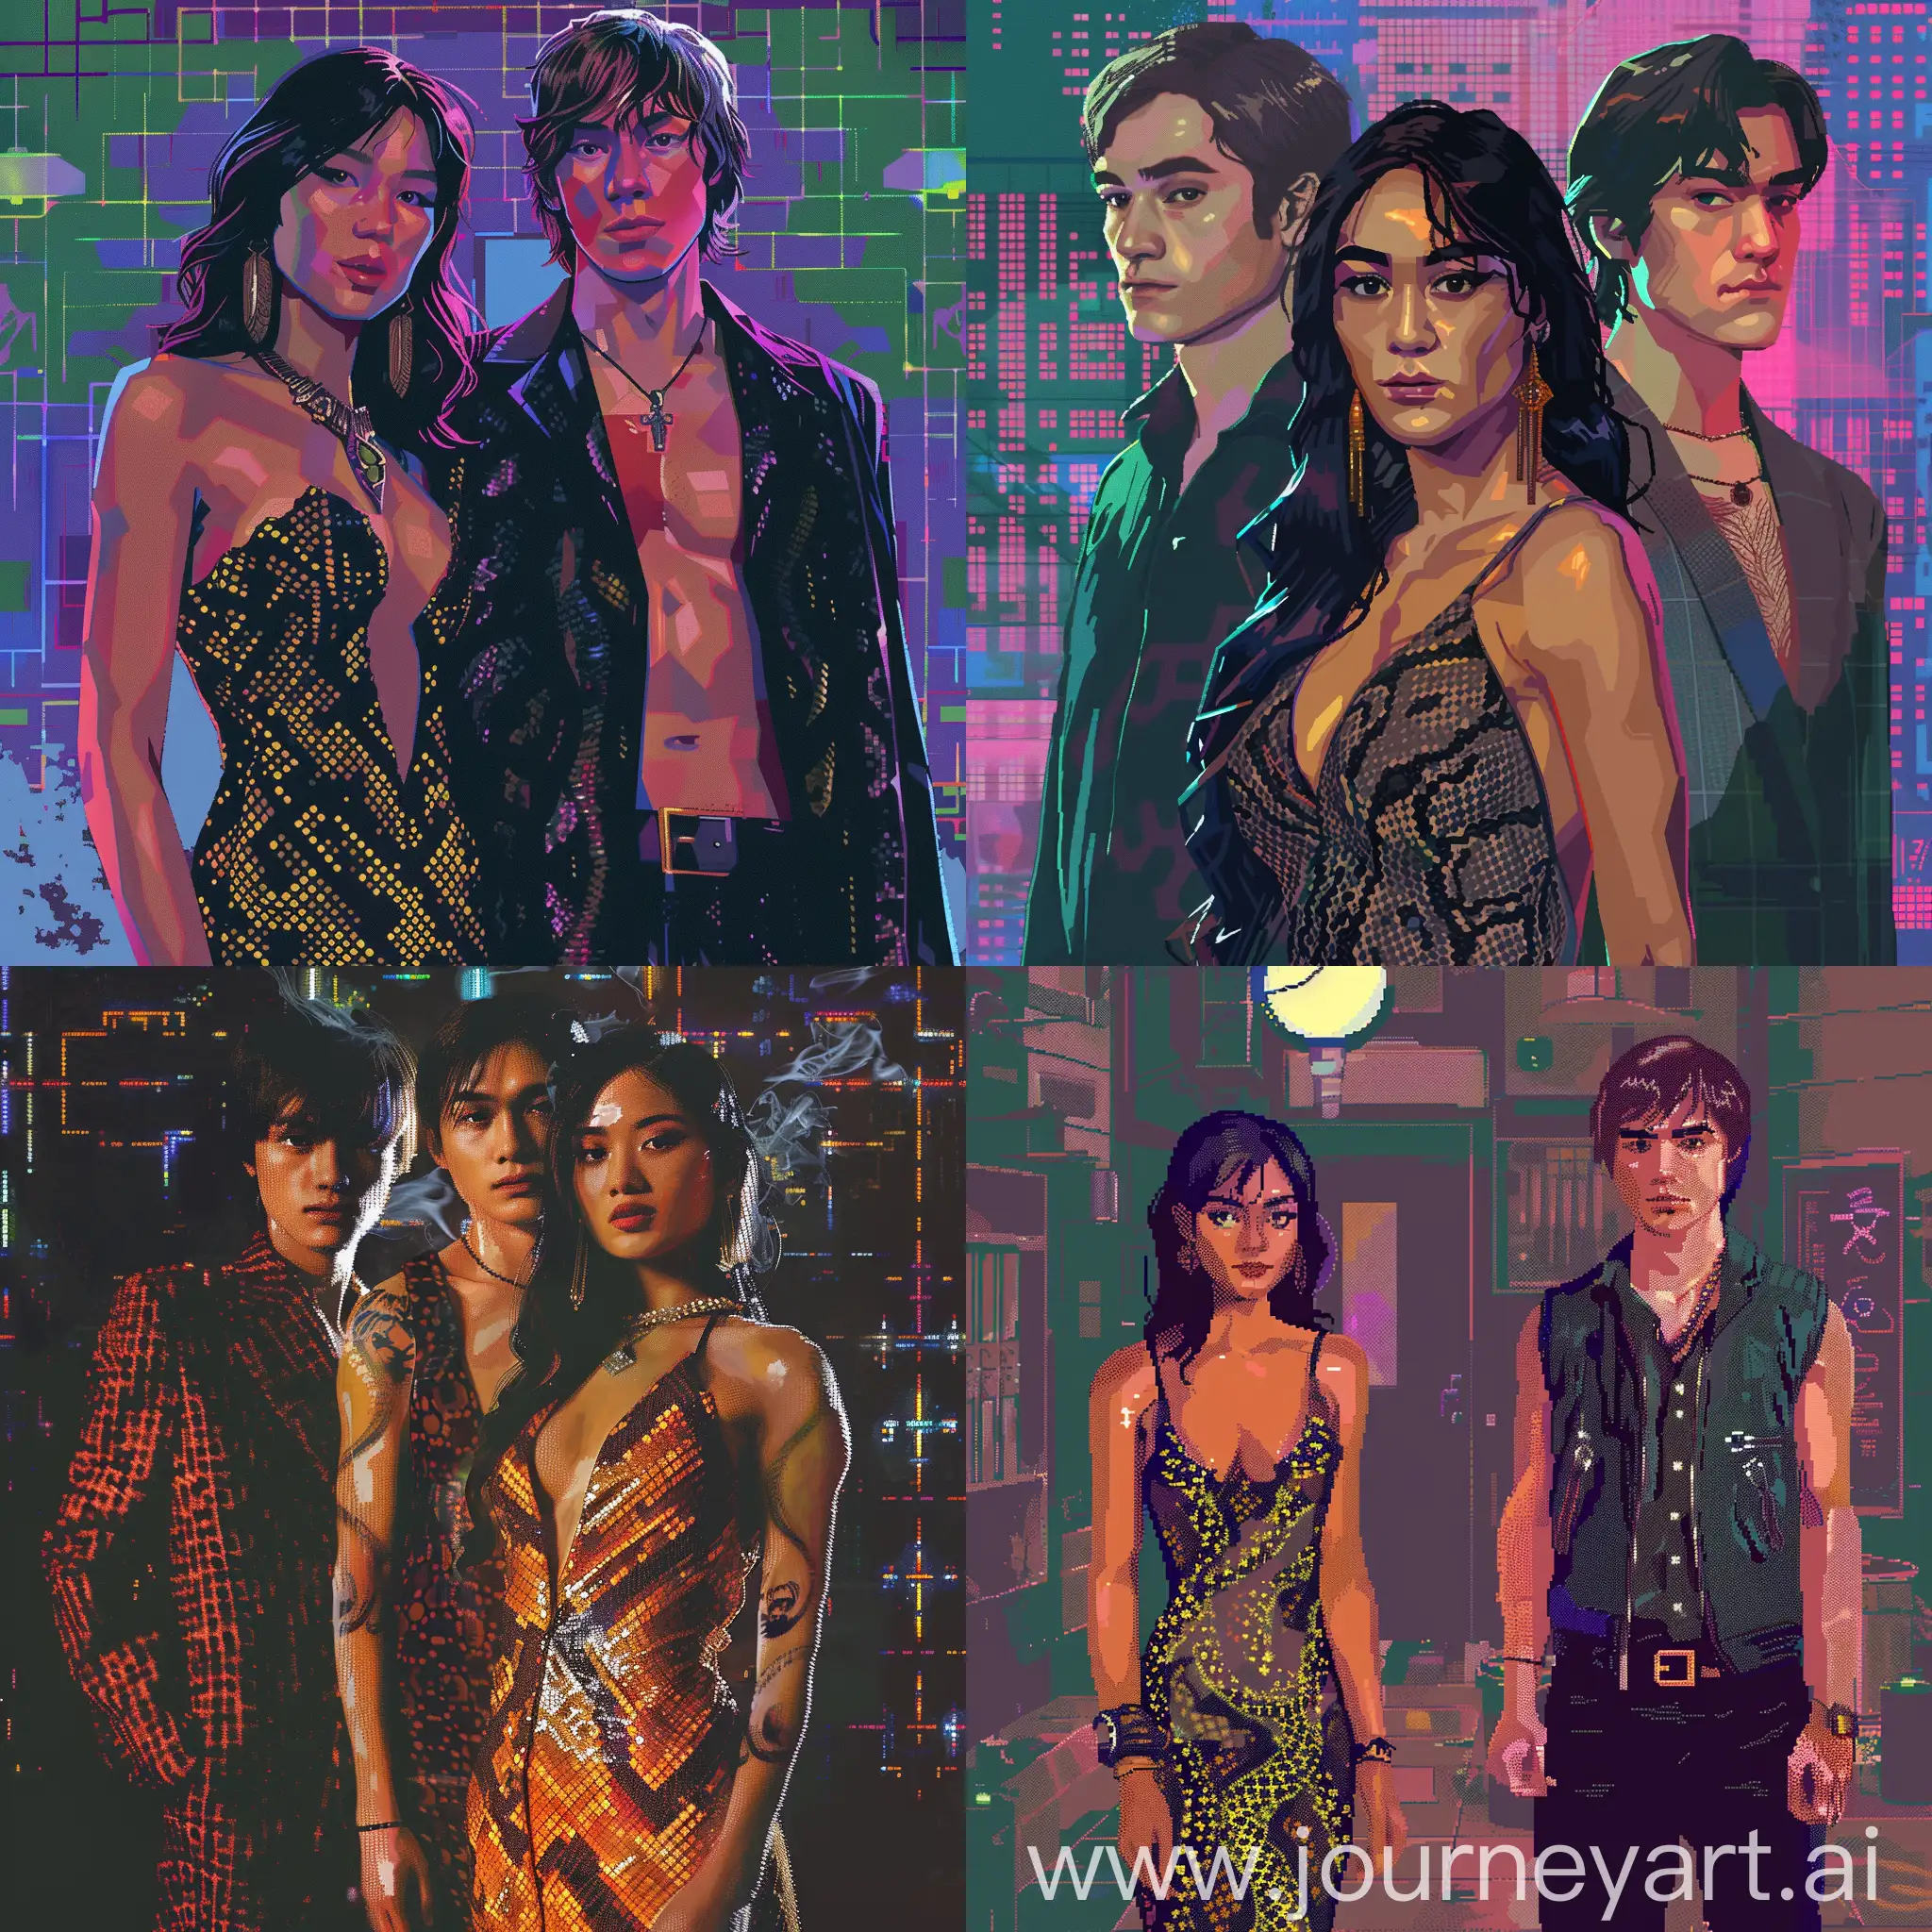 gta vice city style, (Imagine a loading screen with pixelated graphics and a synthwave soundtrack playing in the background), Nagini Maledictus, asian woman in snake dress and young British European man Tom Riddle